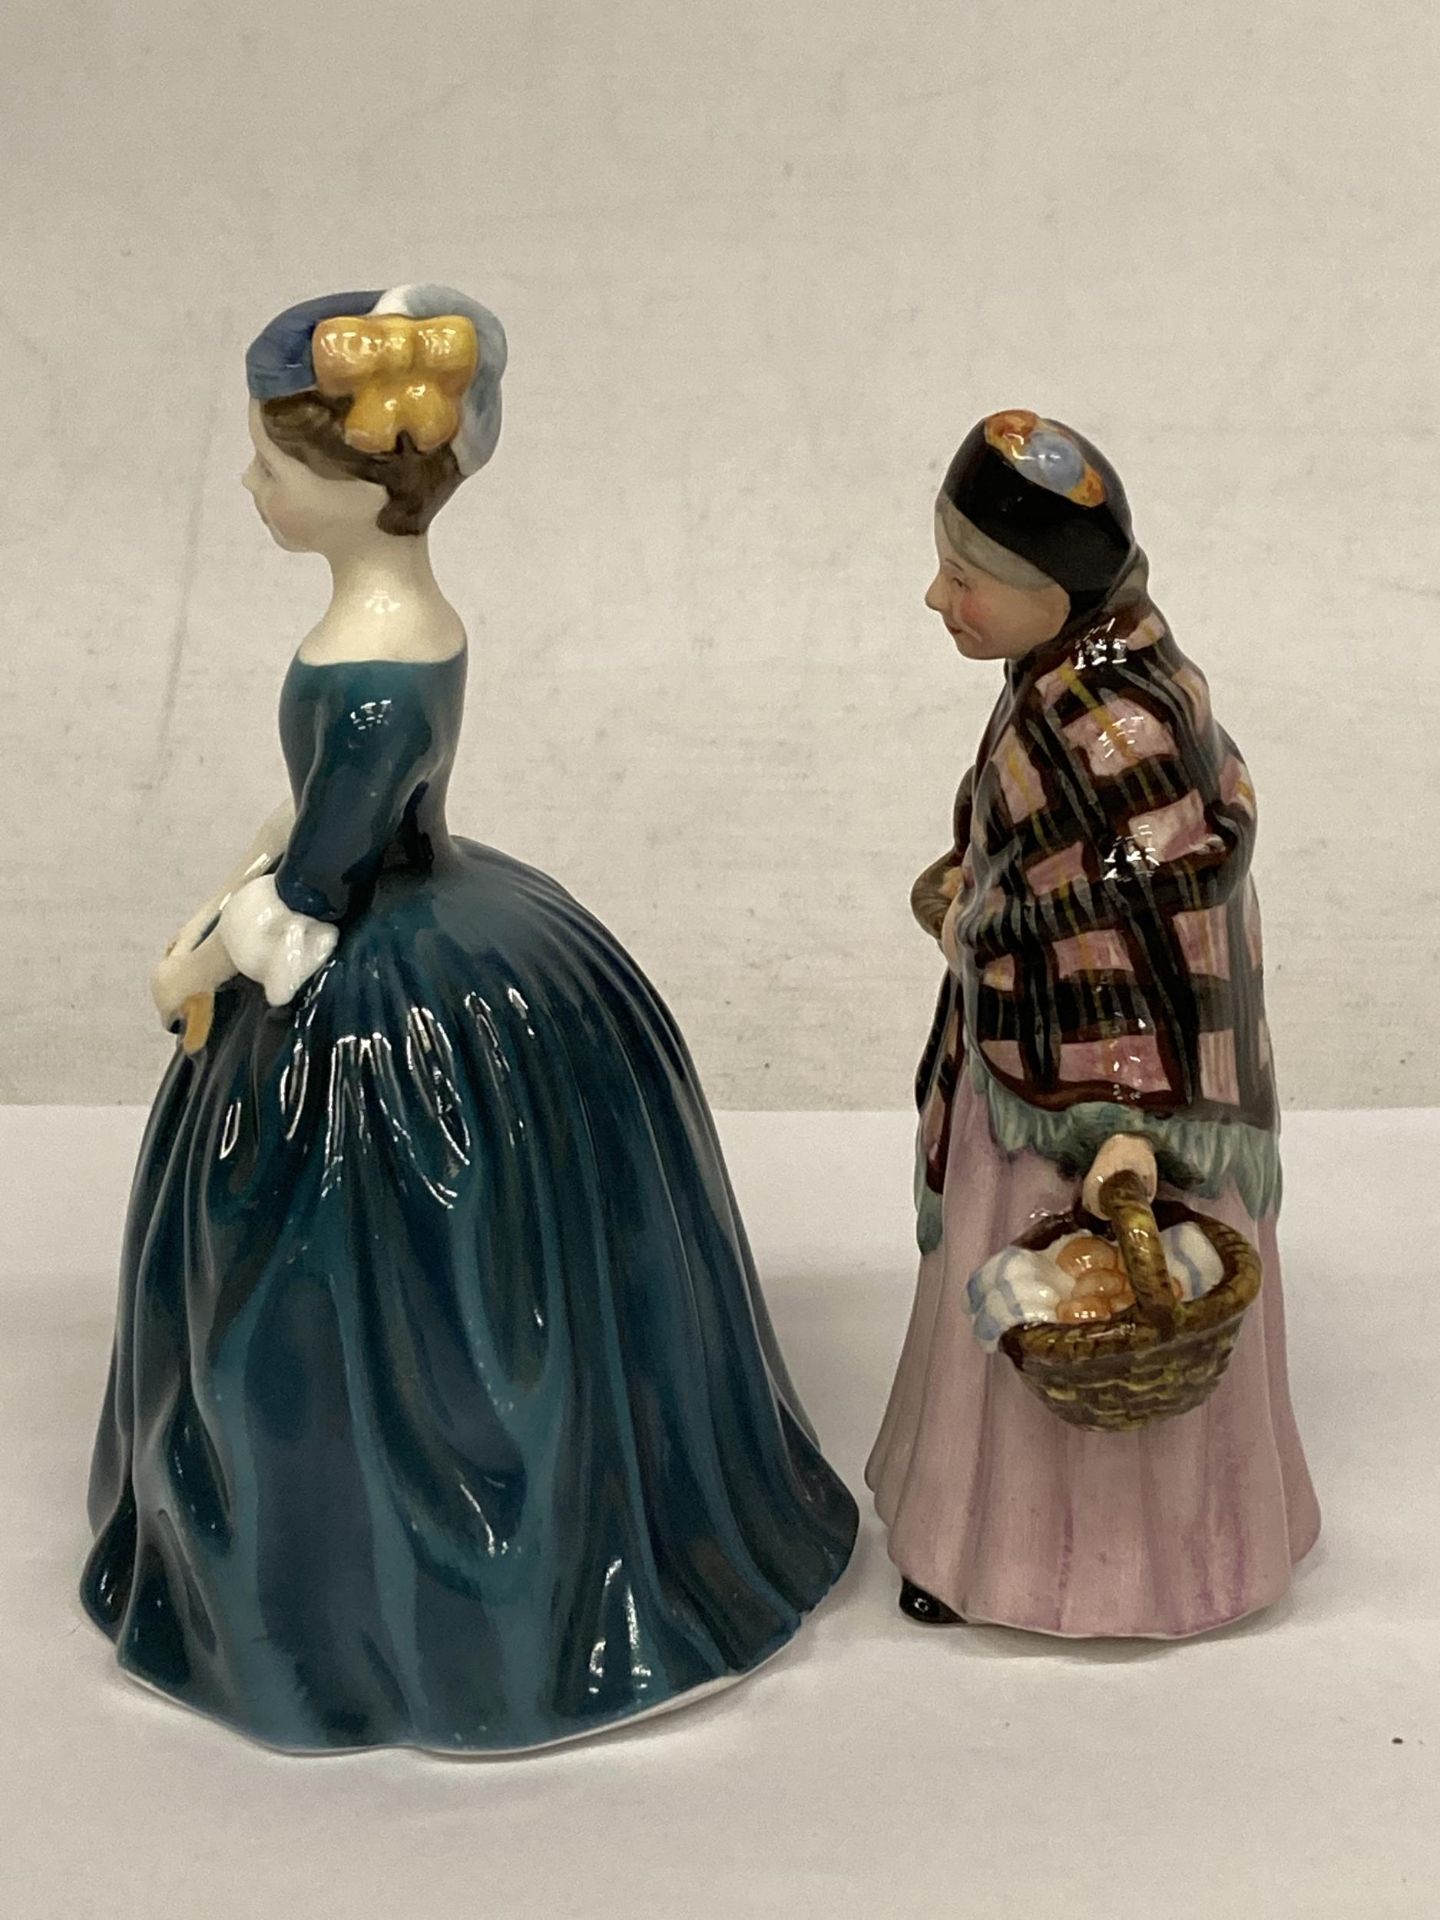 TWO ROYAL DOULTON FIGURINES "THE ORANGE LADY" FROM THE MINIATURE STREET VENDORS AND CHERIE HN2341 - Image 3 of 4